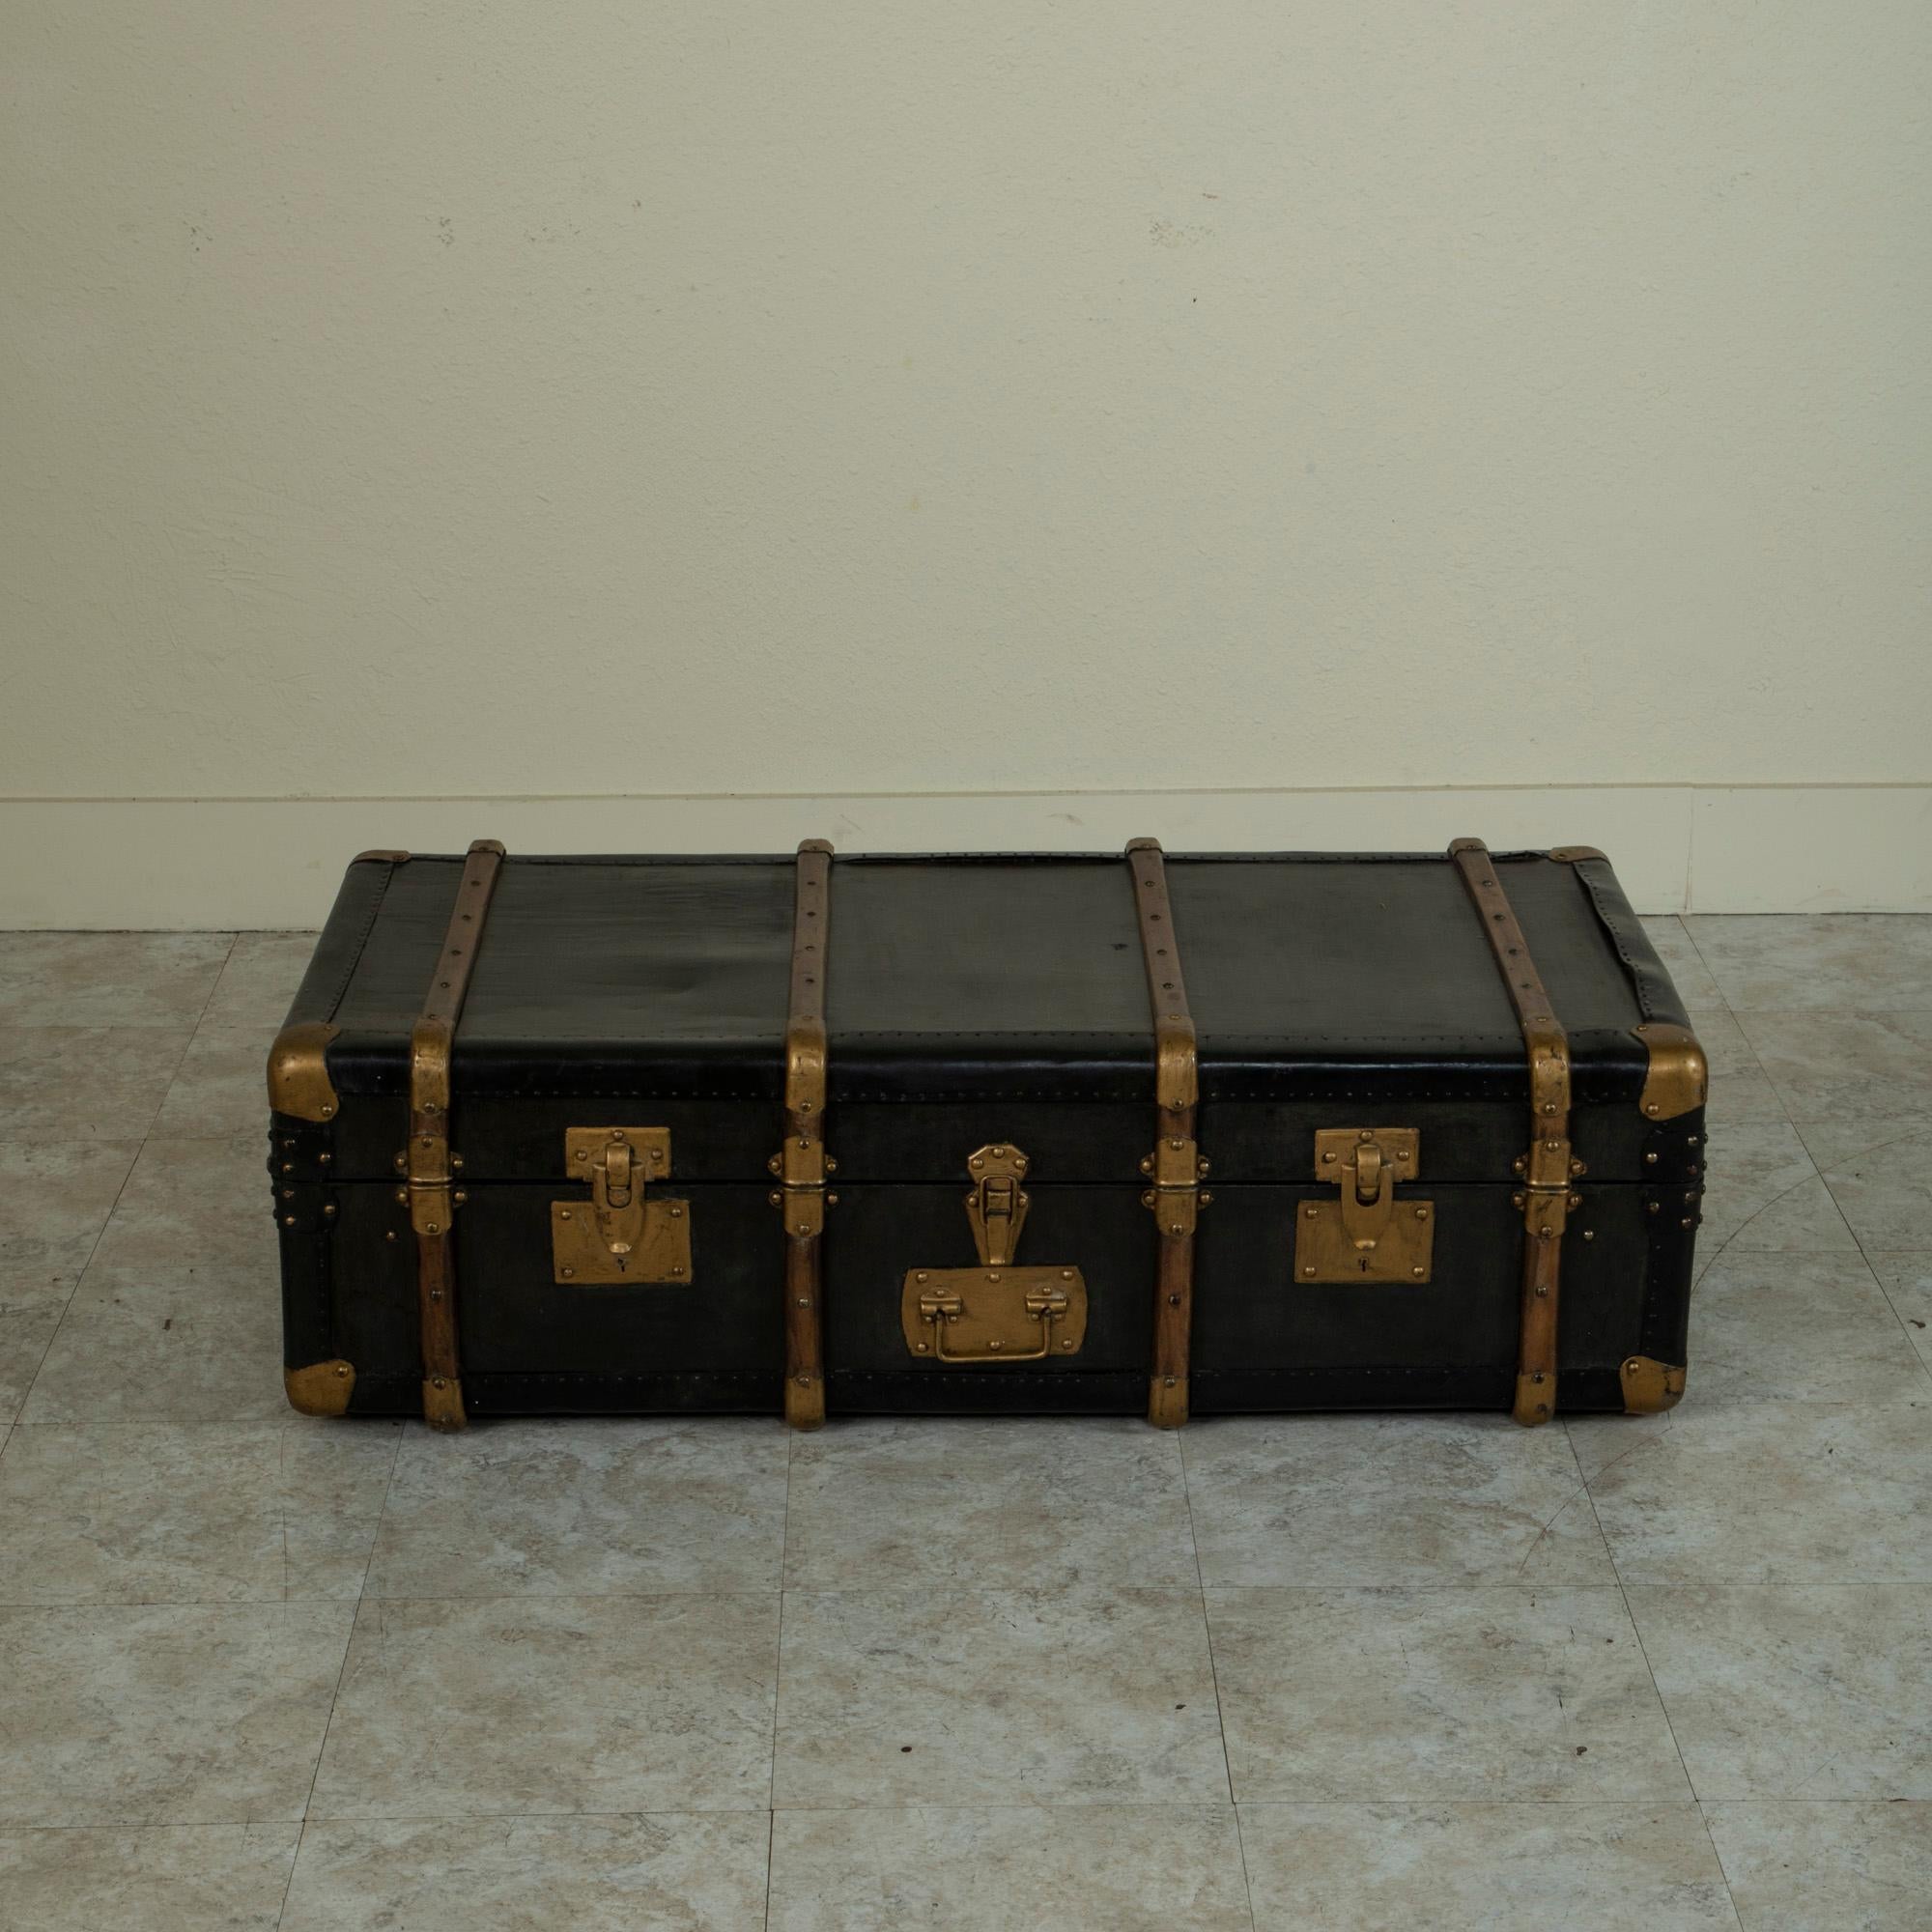 This French steam trunk from the mid-twentieth century is covered in black leather and moleskin and features wooden runners and metal corners painted gold. On one side is a brass plate where a card with one's name and address can be inserted, as